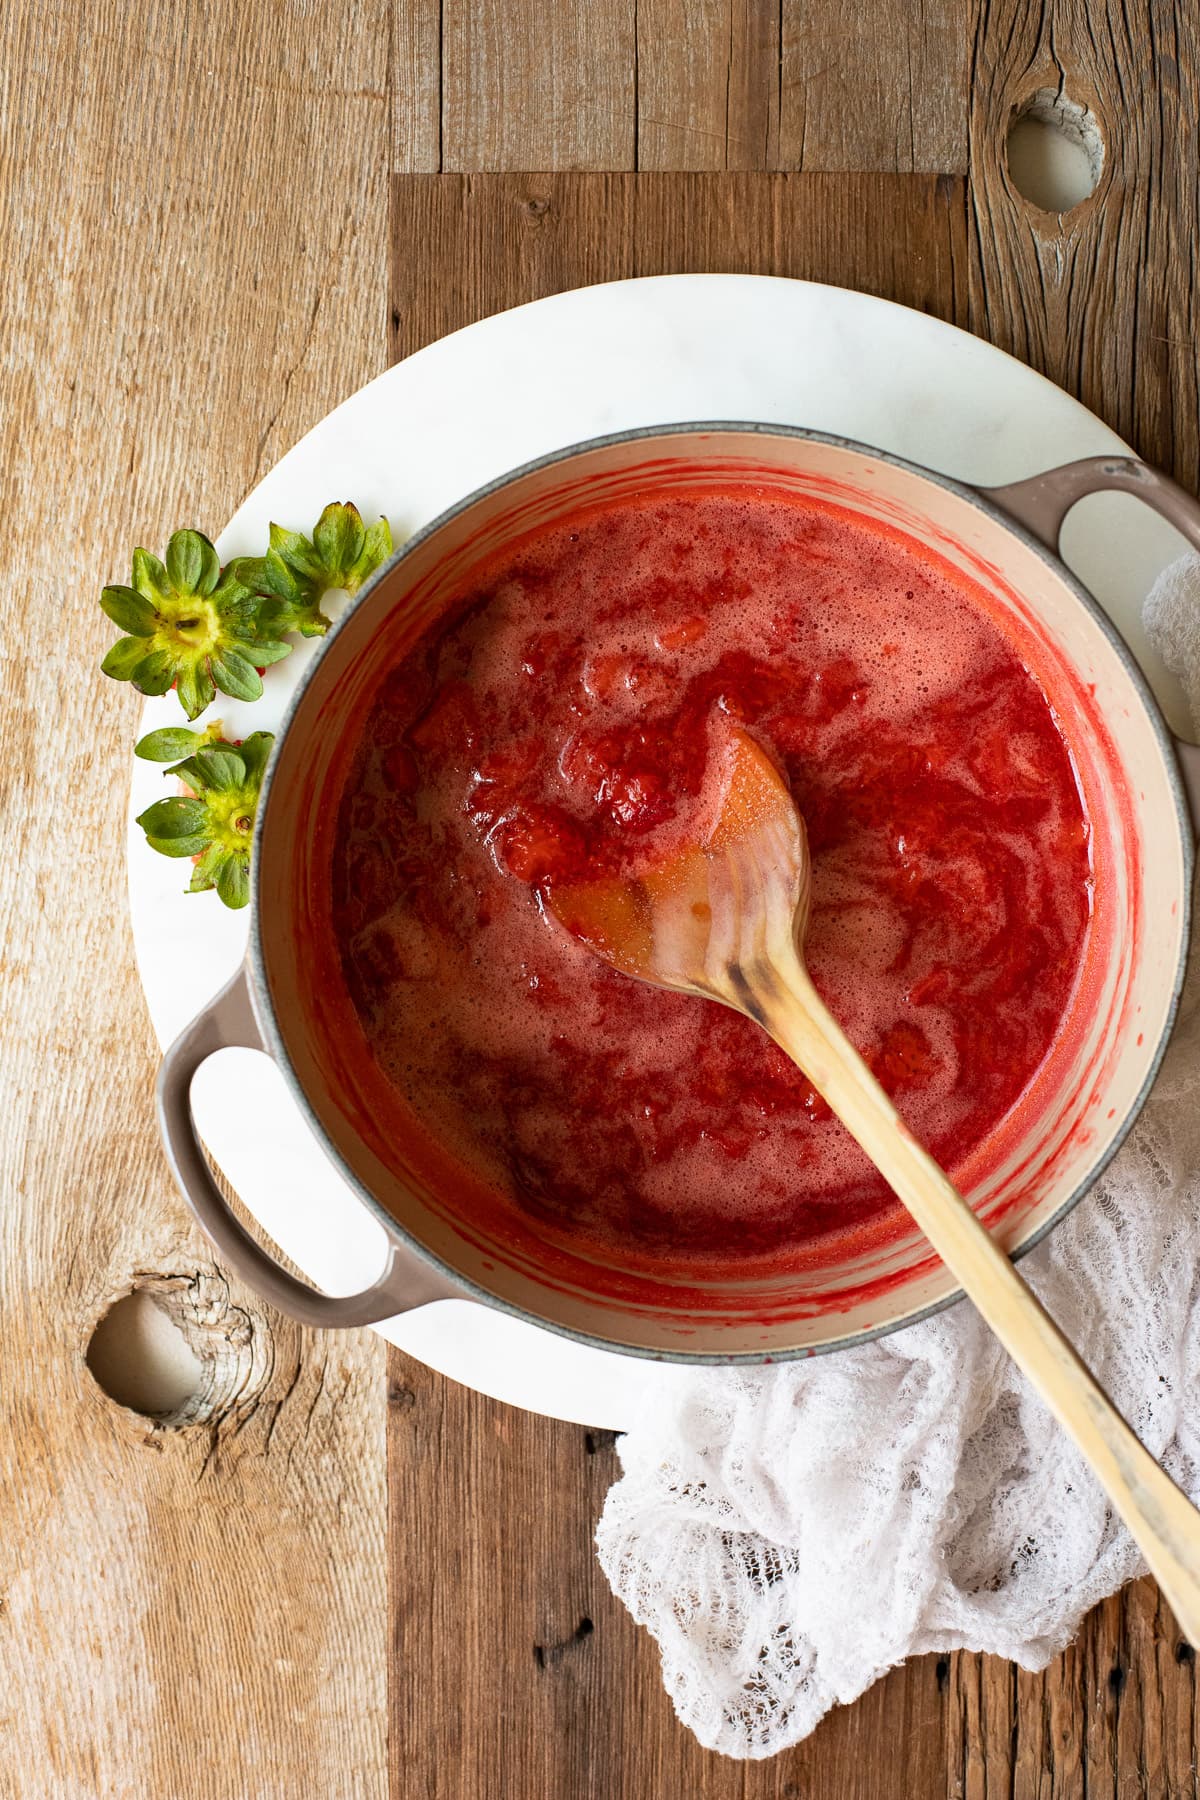 Strawberries simmered with sugar in a saucepan.